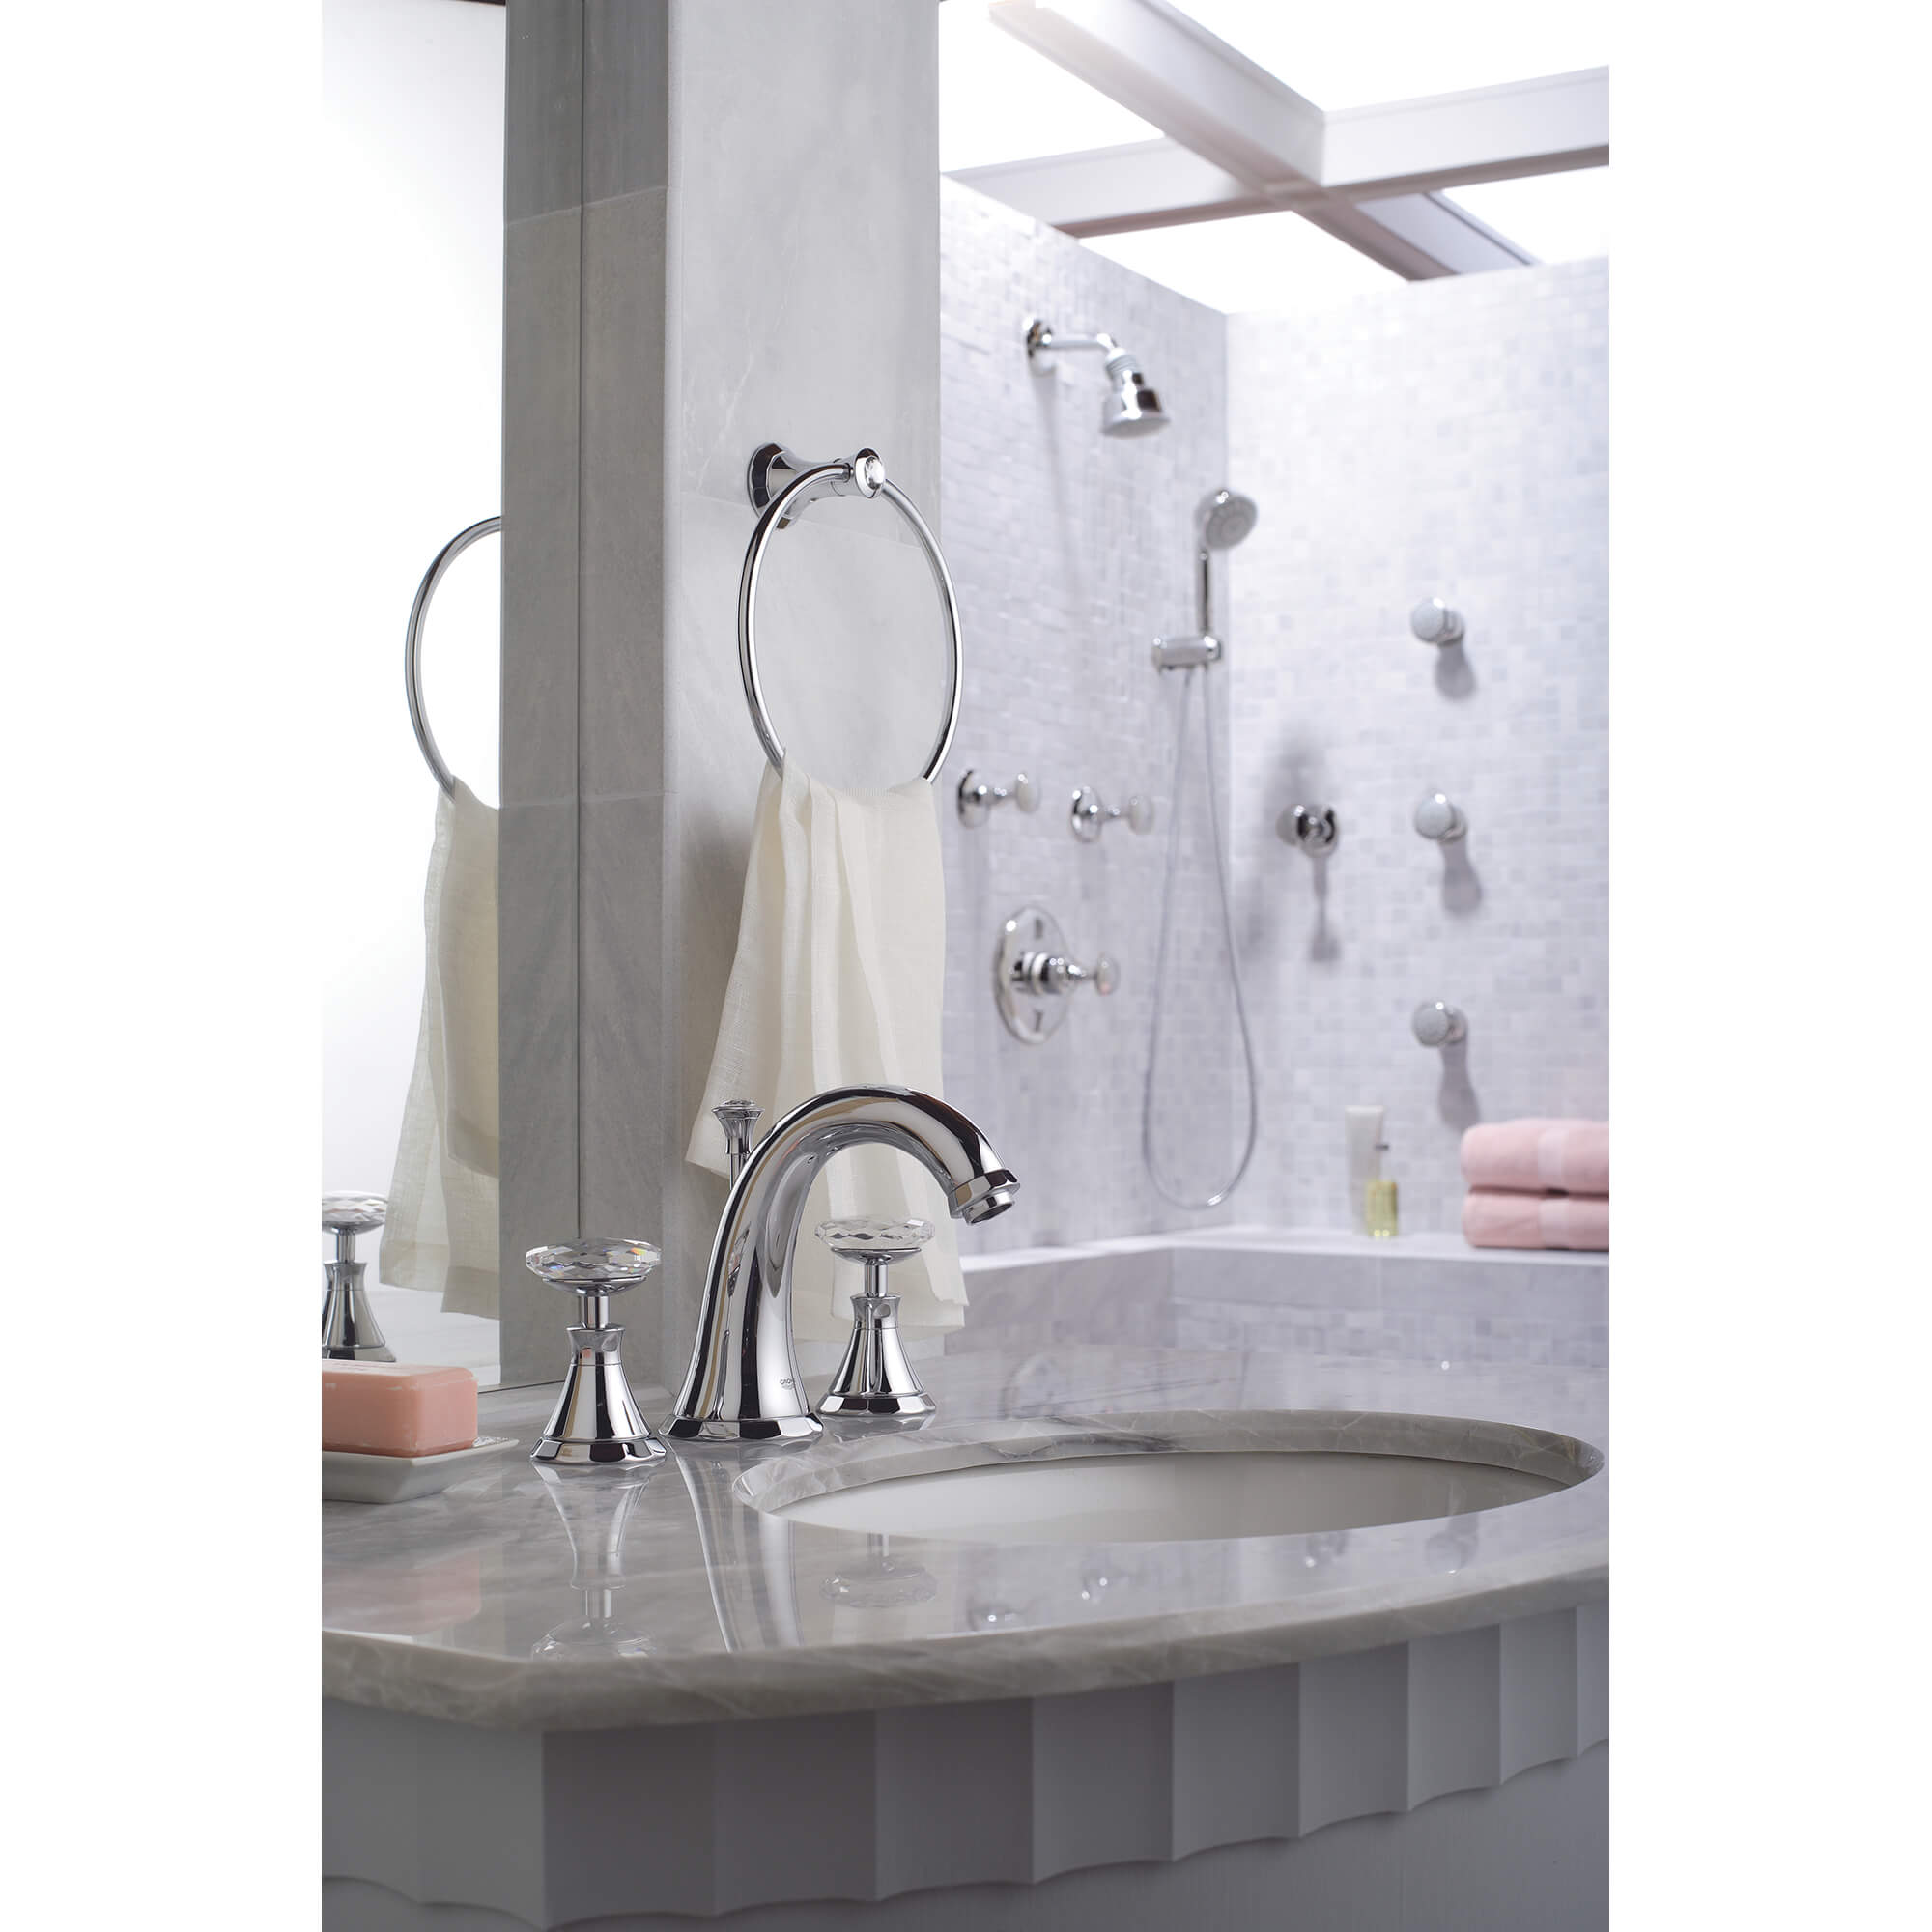 3-Hole 2-Handle Deck Mount Roman Tub Faucet with Hand Shower